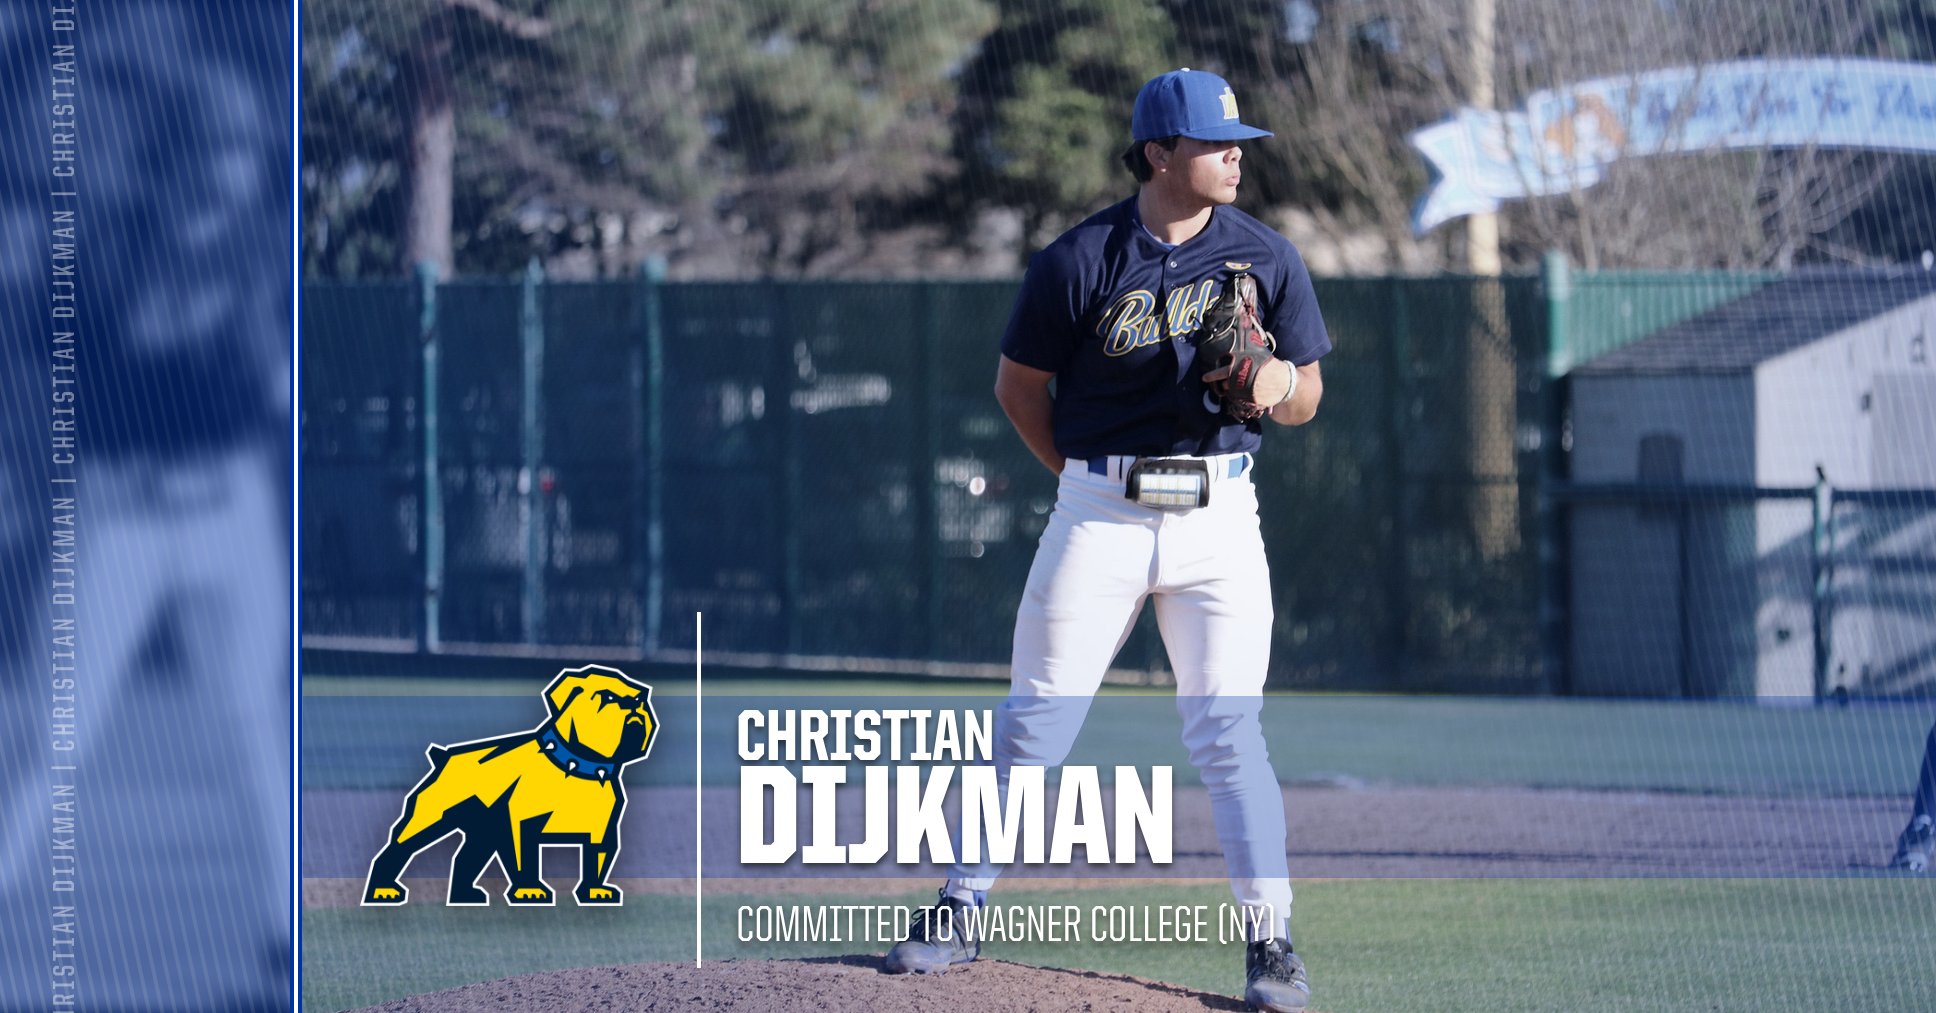 Baseball's Christian Dijkman Commits to Wagner College